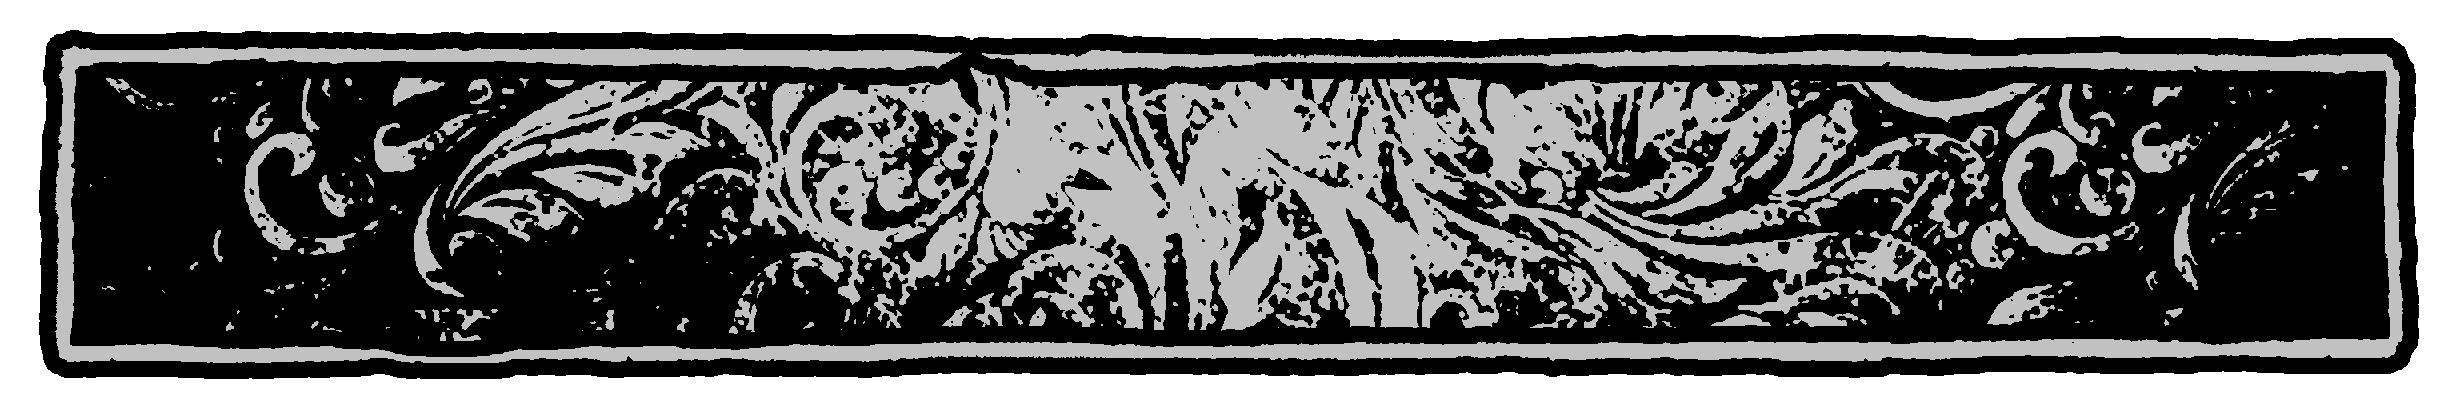 Decorative accent image with engraved pattern